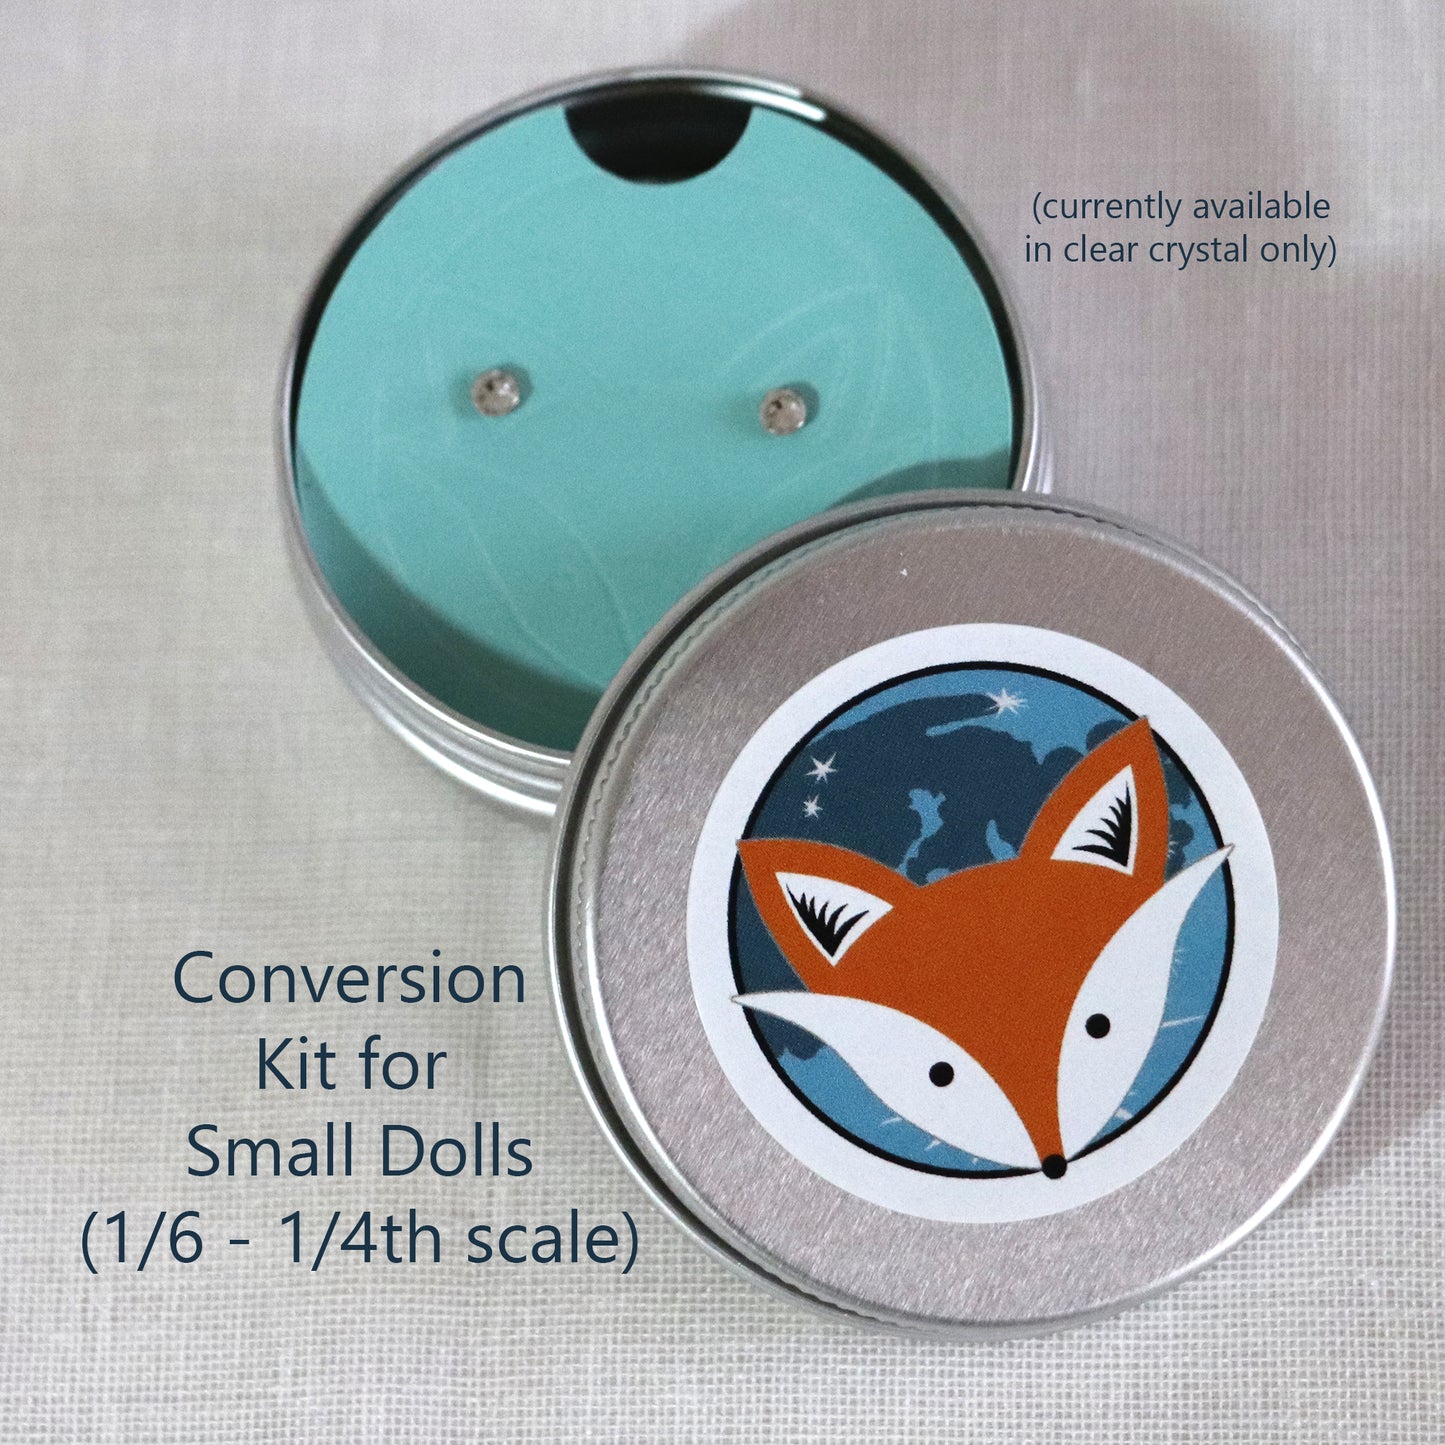 No-Hole CONVERSION Jewelry Kit - Size Small for Dolls with Pierced Ears